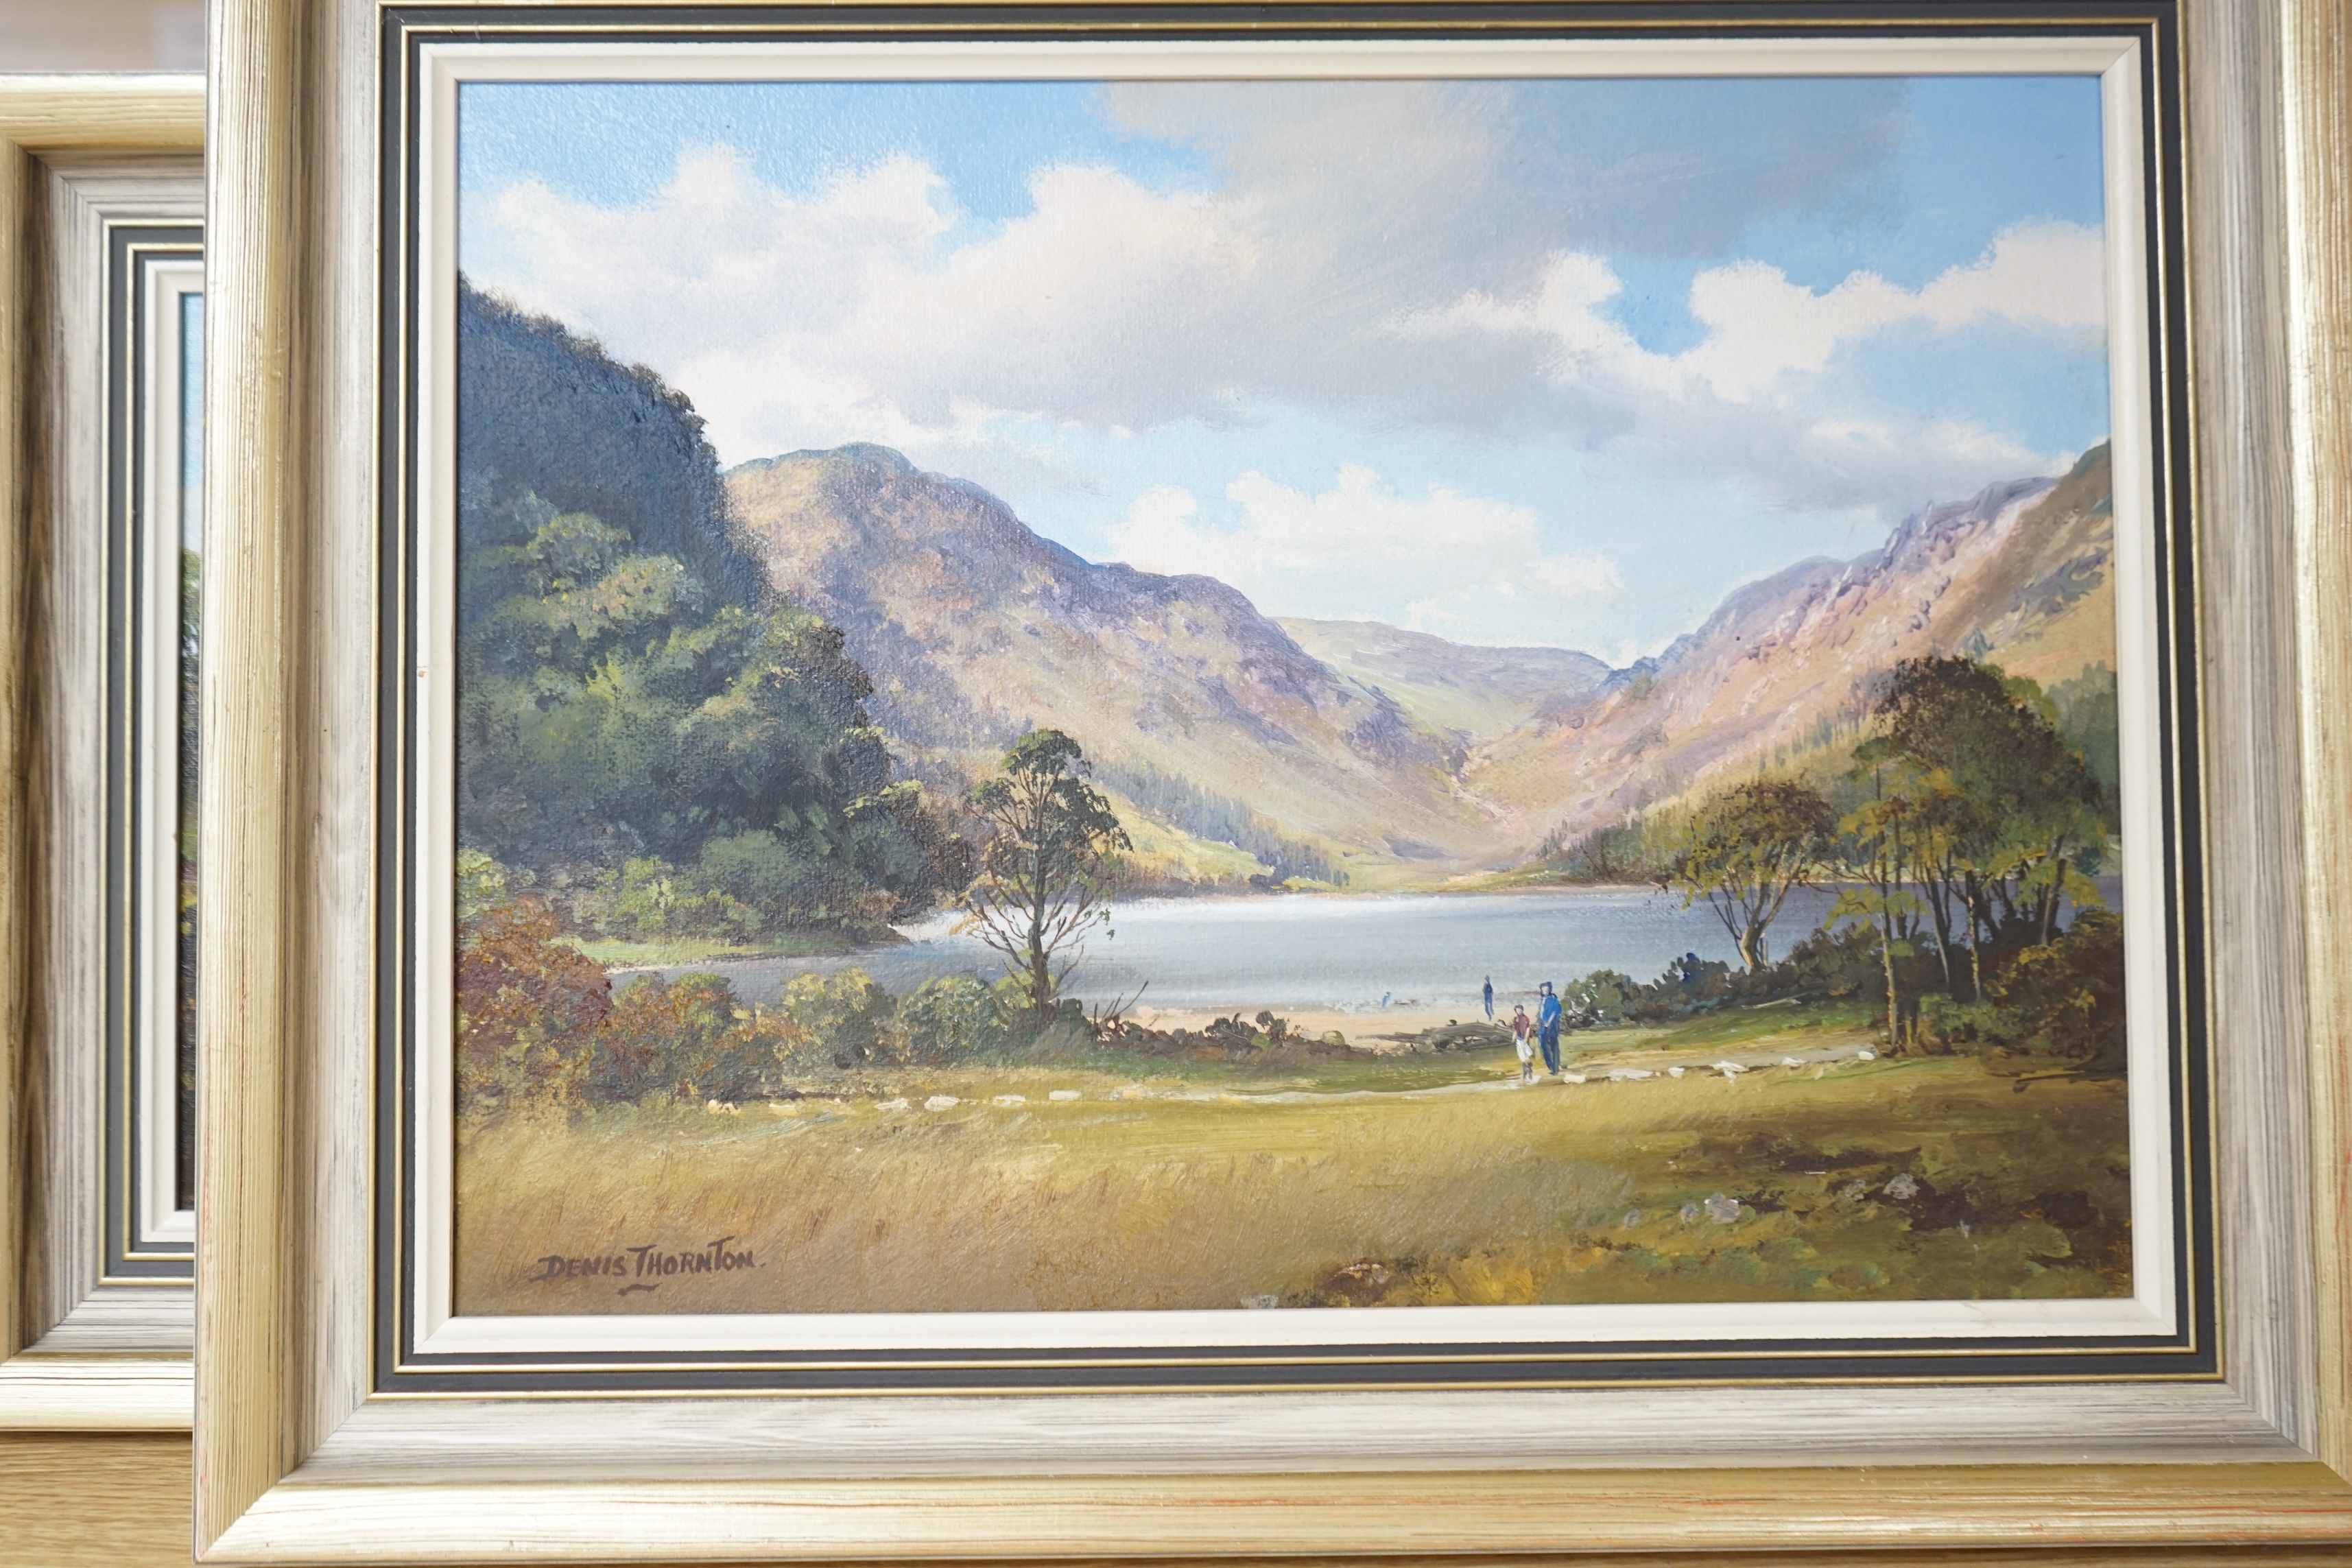 Denis Thornton (Irish, b.1937), three oils on canvas to include, ‘The Dun River, Co. Antrim’ and ‘Glendalough, Co. Wicklow’, each signed, largest 29 x 39cm. Condition - good